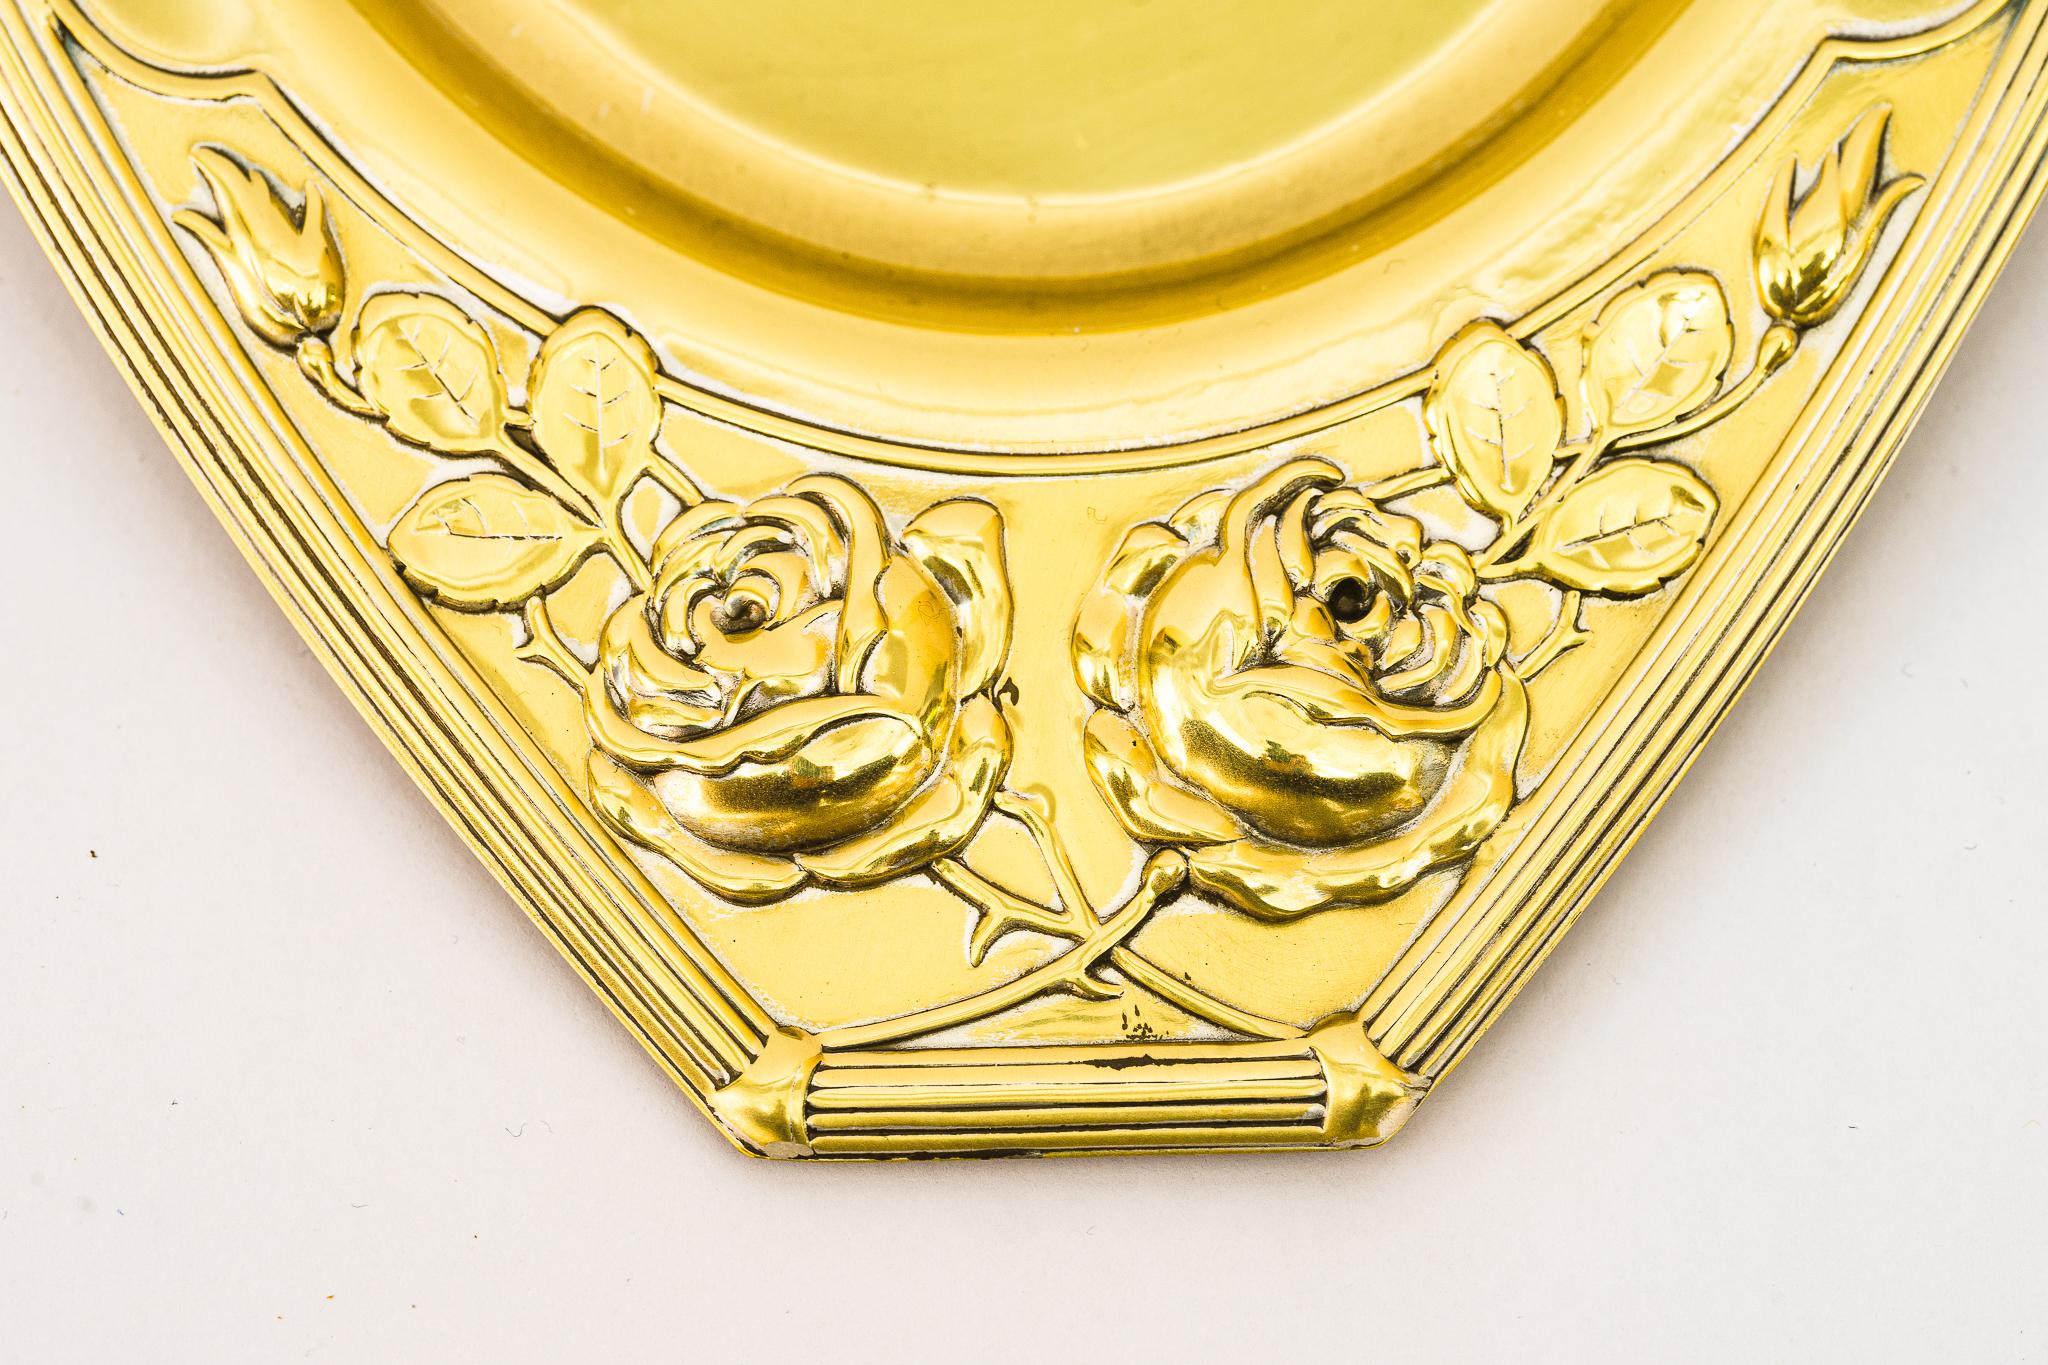 Lacquered Small Jugendstil Serving Plate Vienna Around 1908 For Sale